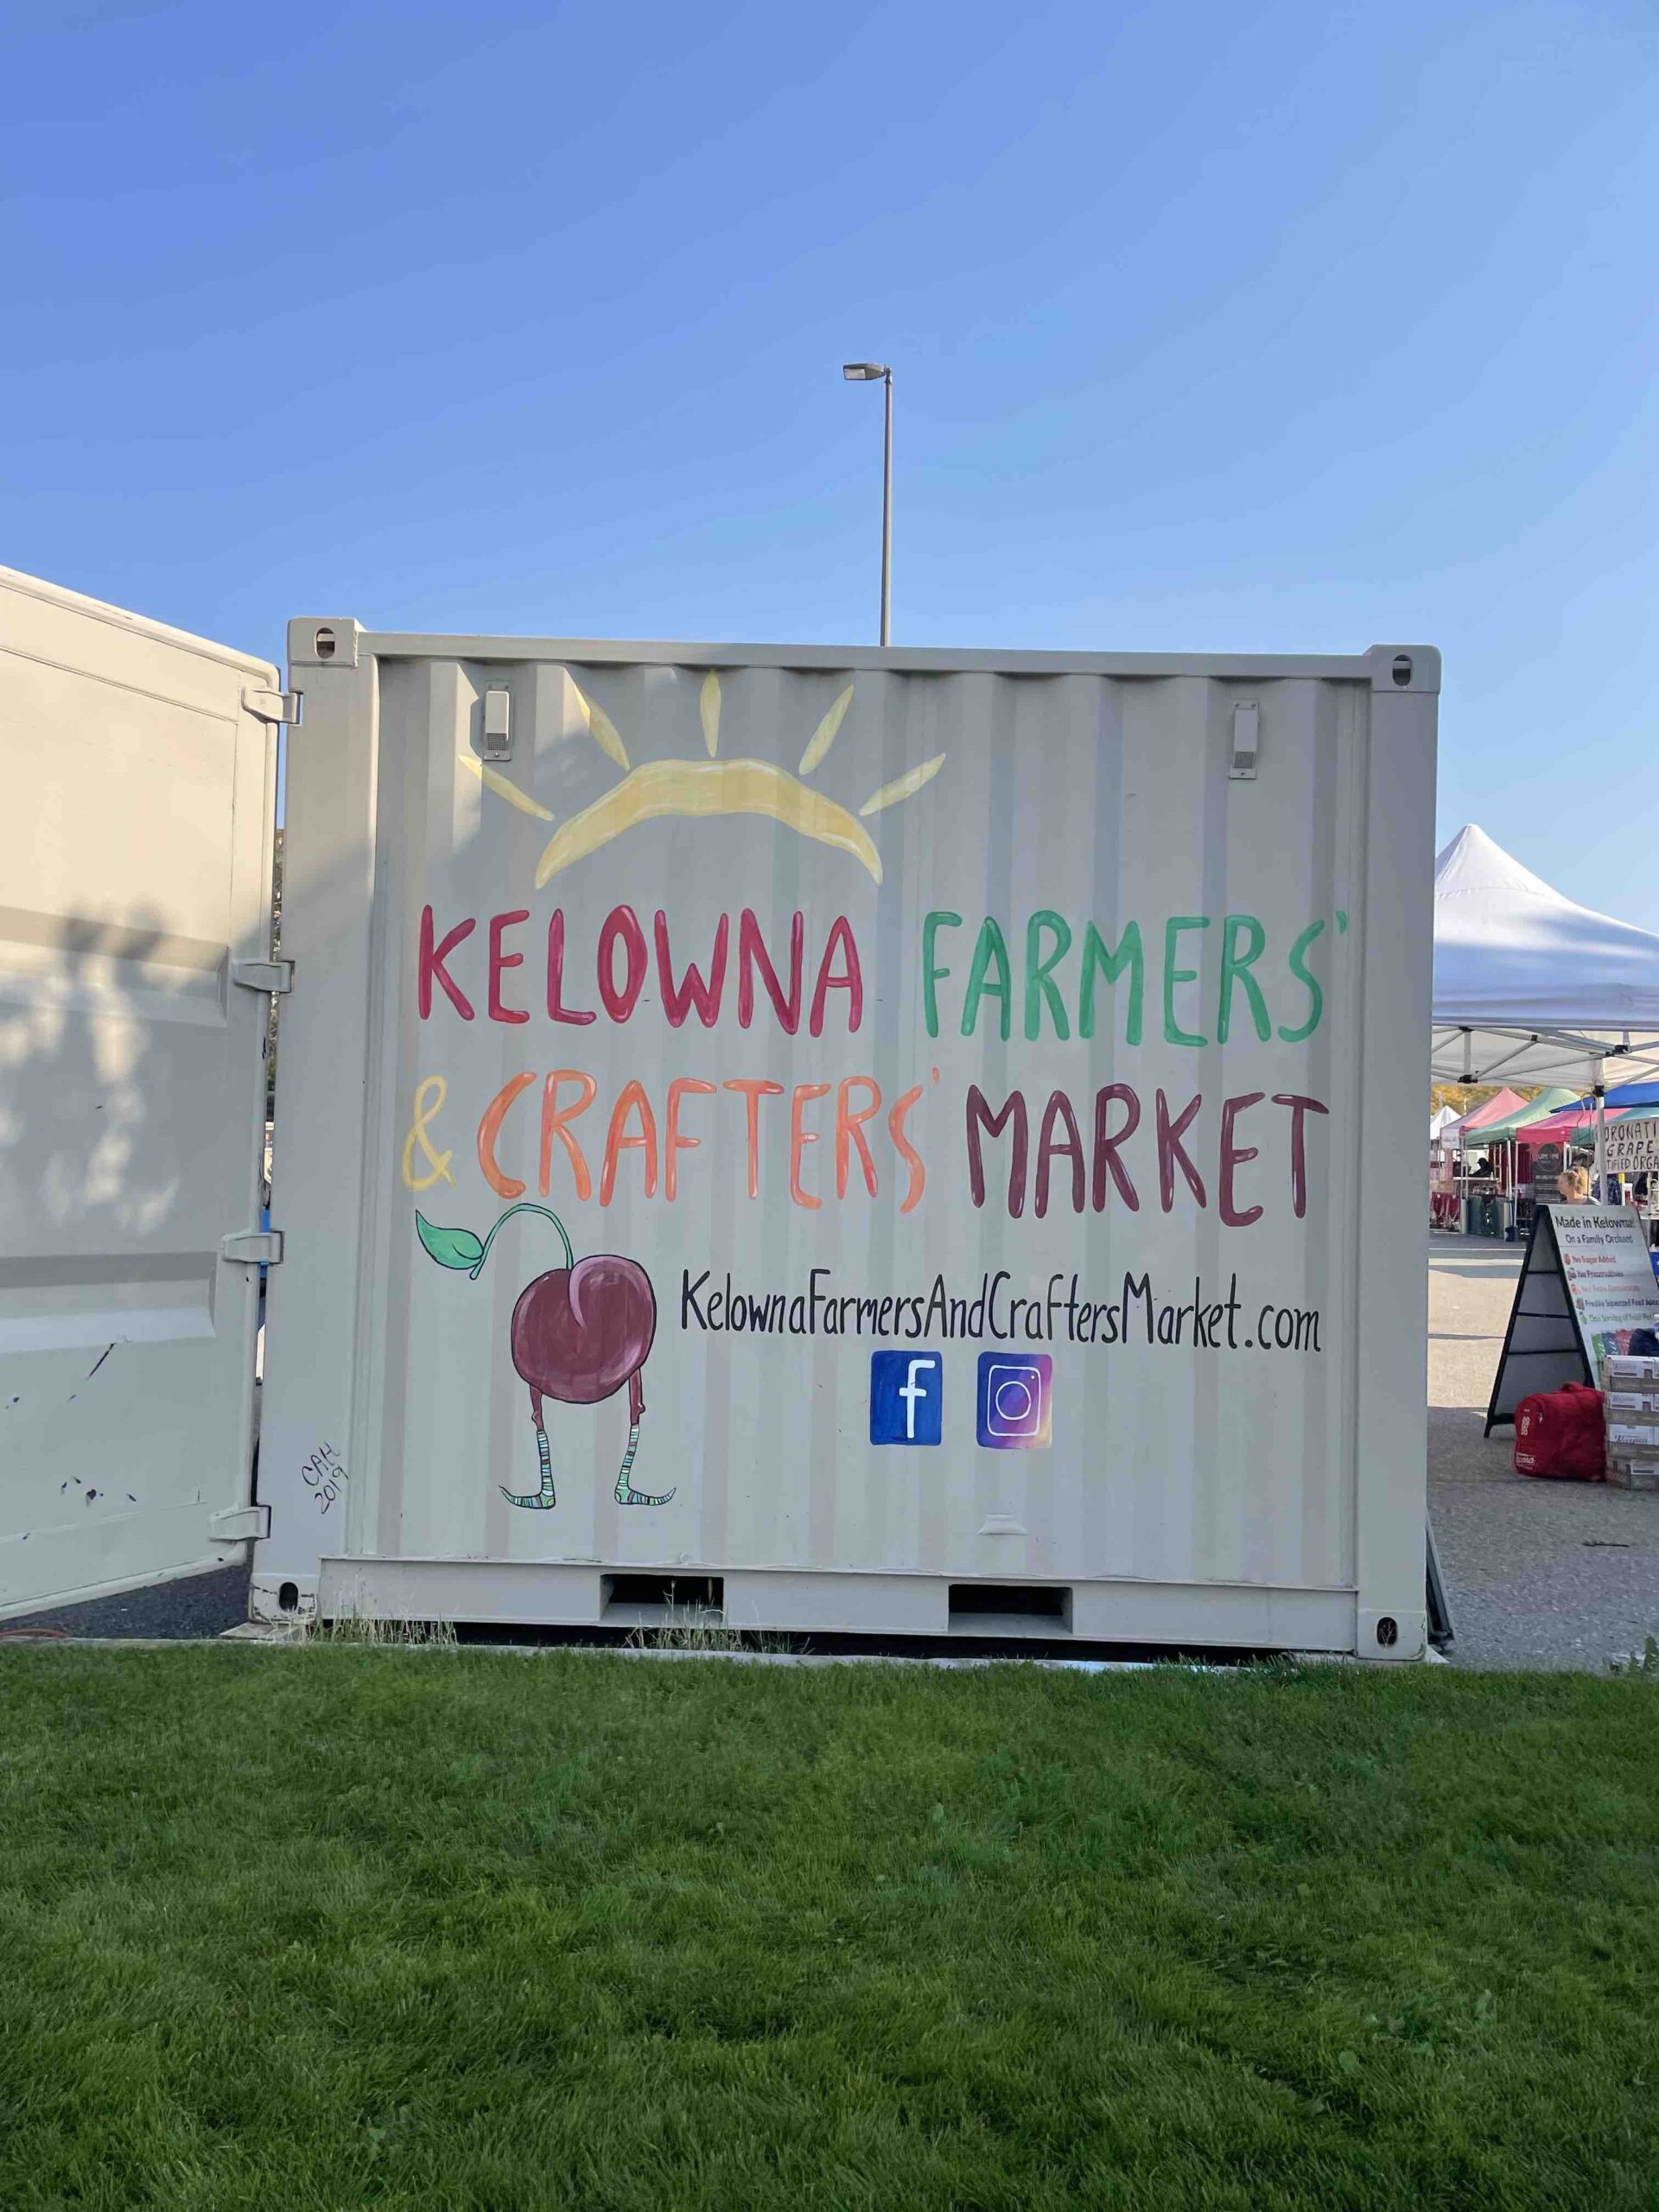 Heading into the Kelowna Farmers' and Crafters' Market 